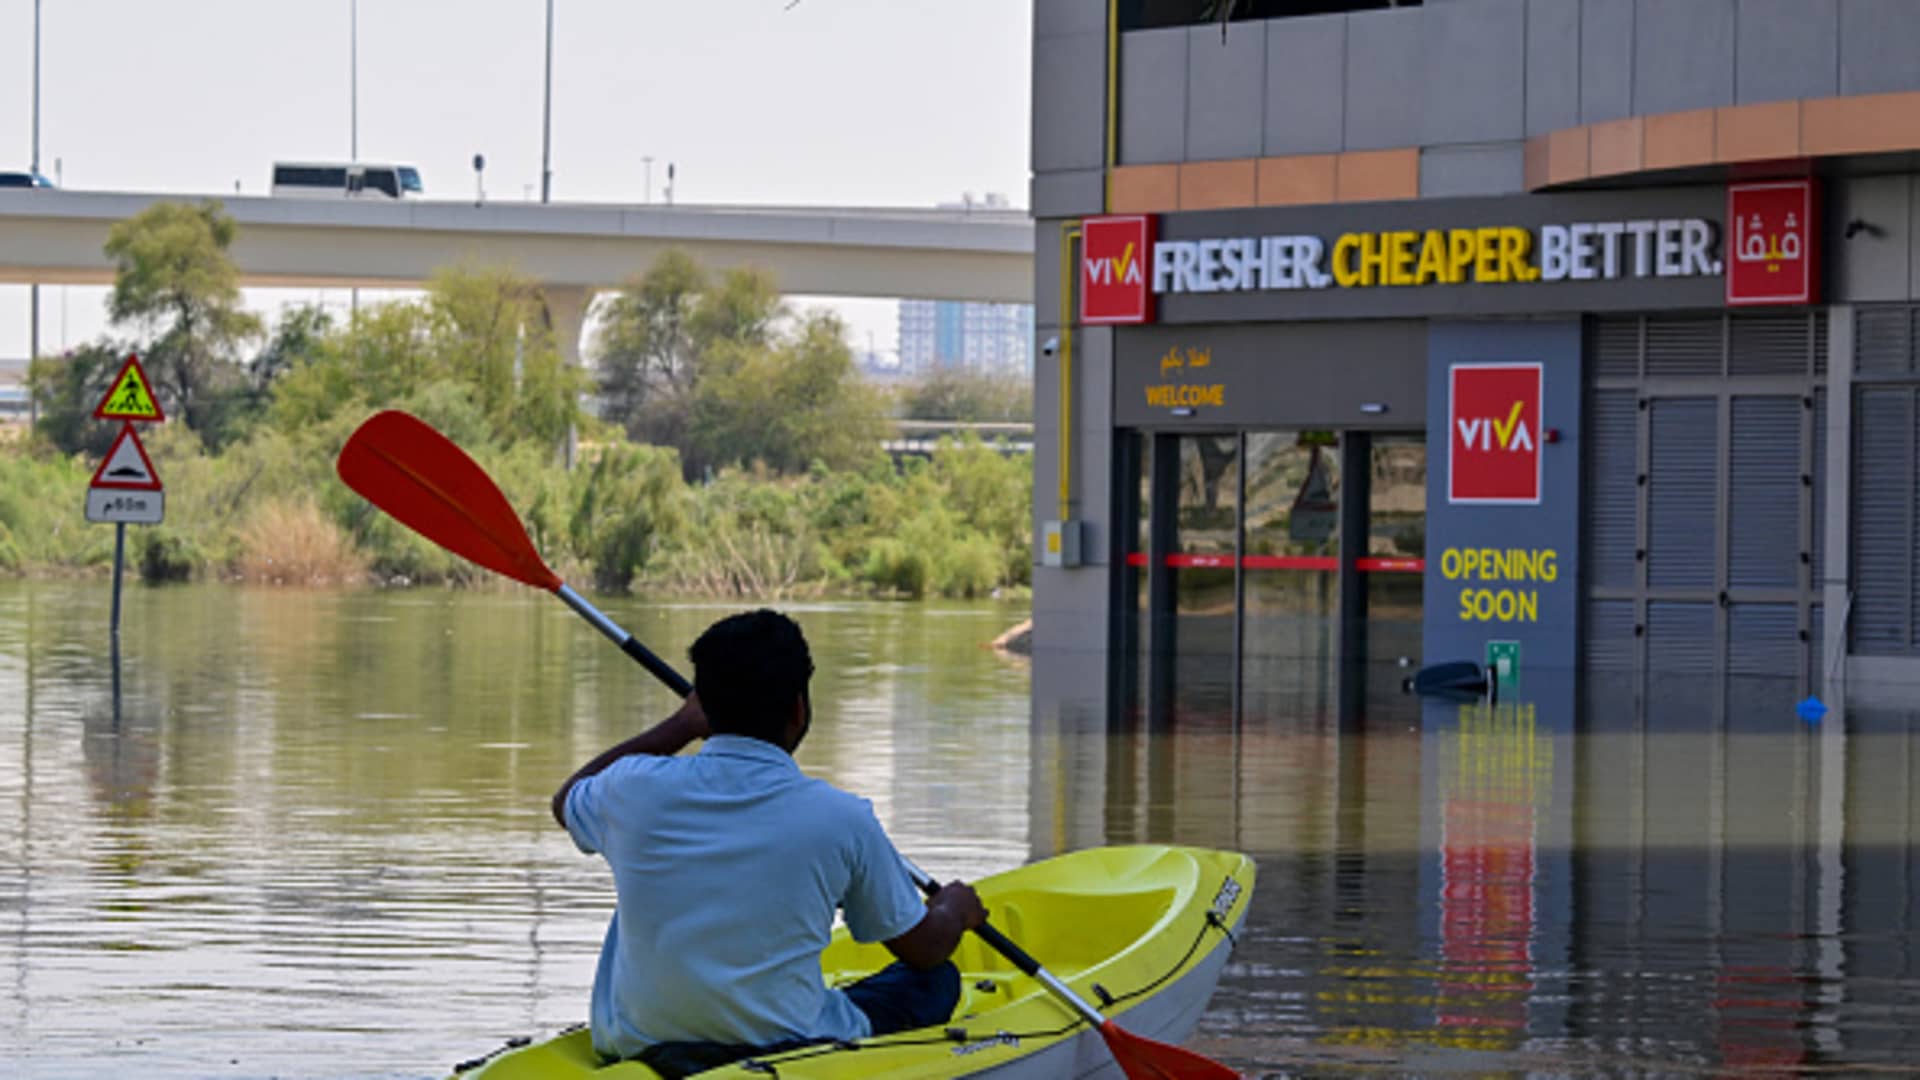 A man steers his canoe on a flooded street in Dubai following heavy rains on April 18, 2024. Dubai's giant highways were clogged by flooding and its major airport was in chaos as the Middle East financial center remained gridlocked on April 18, a day after the heaviest rains on record. 